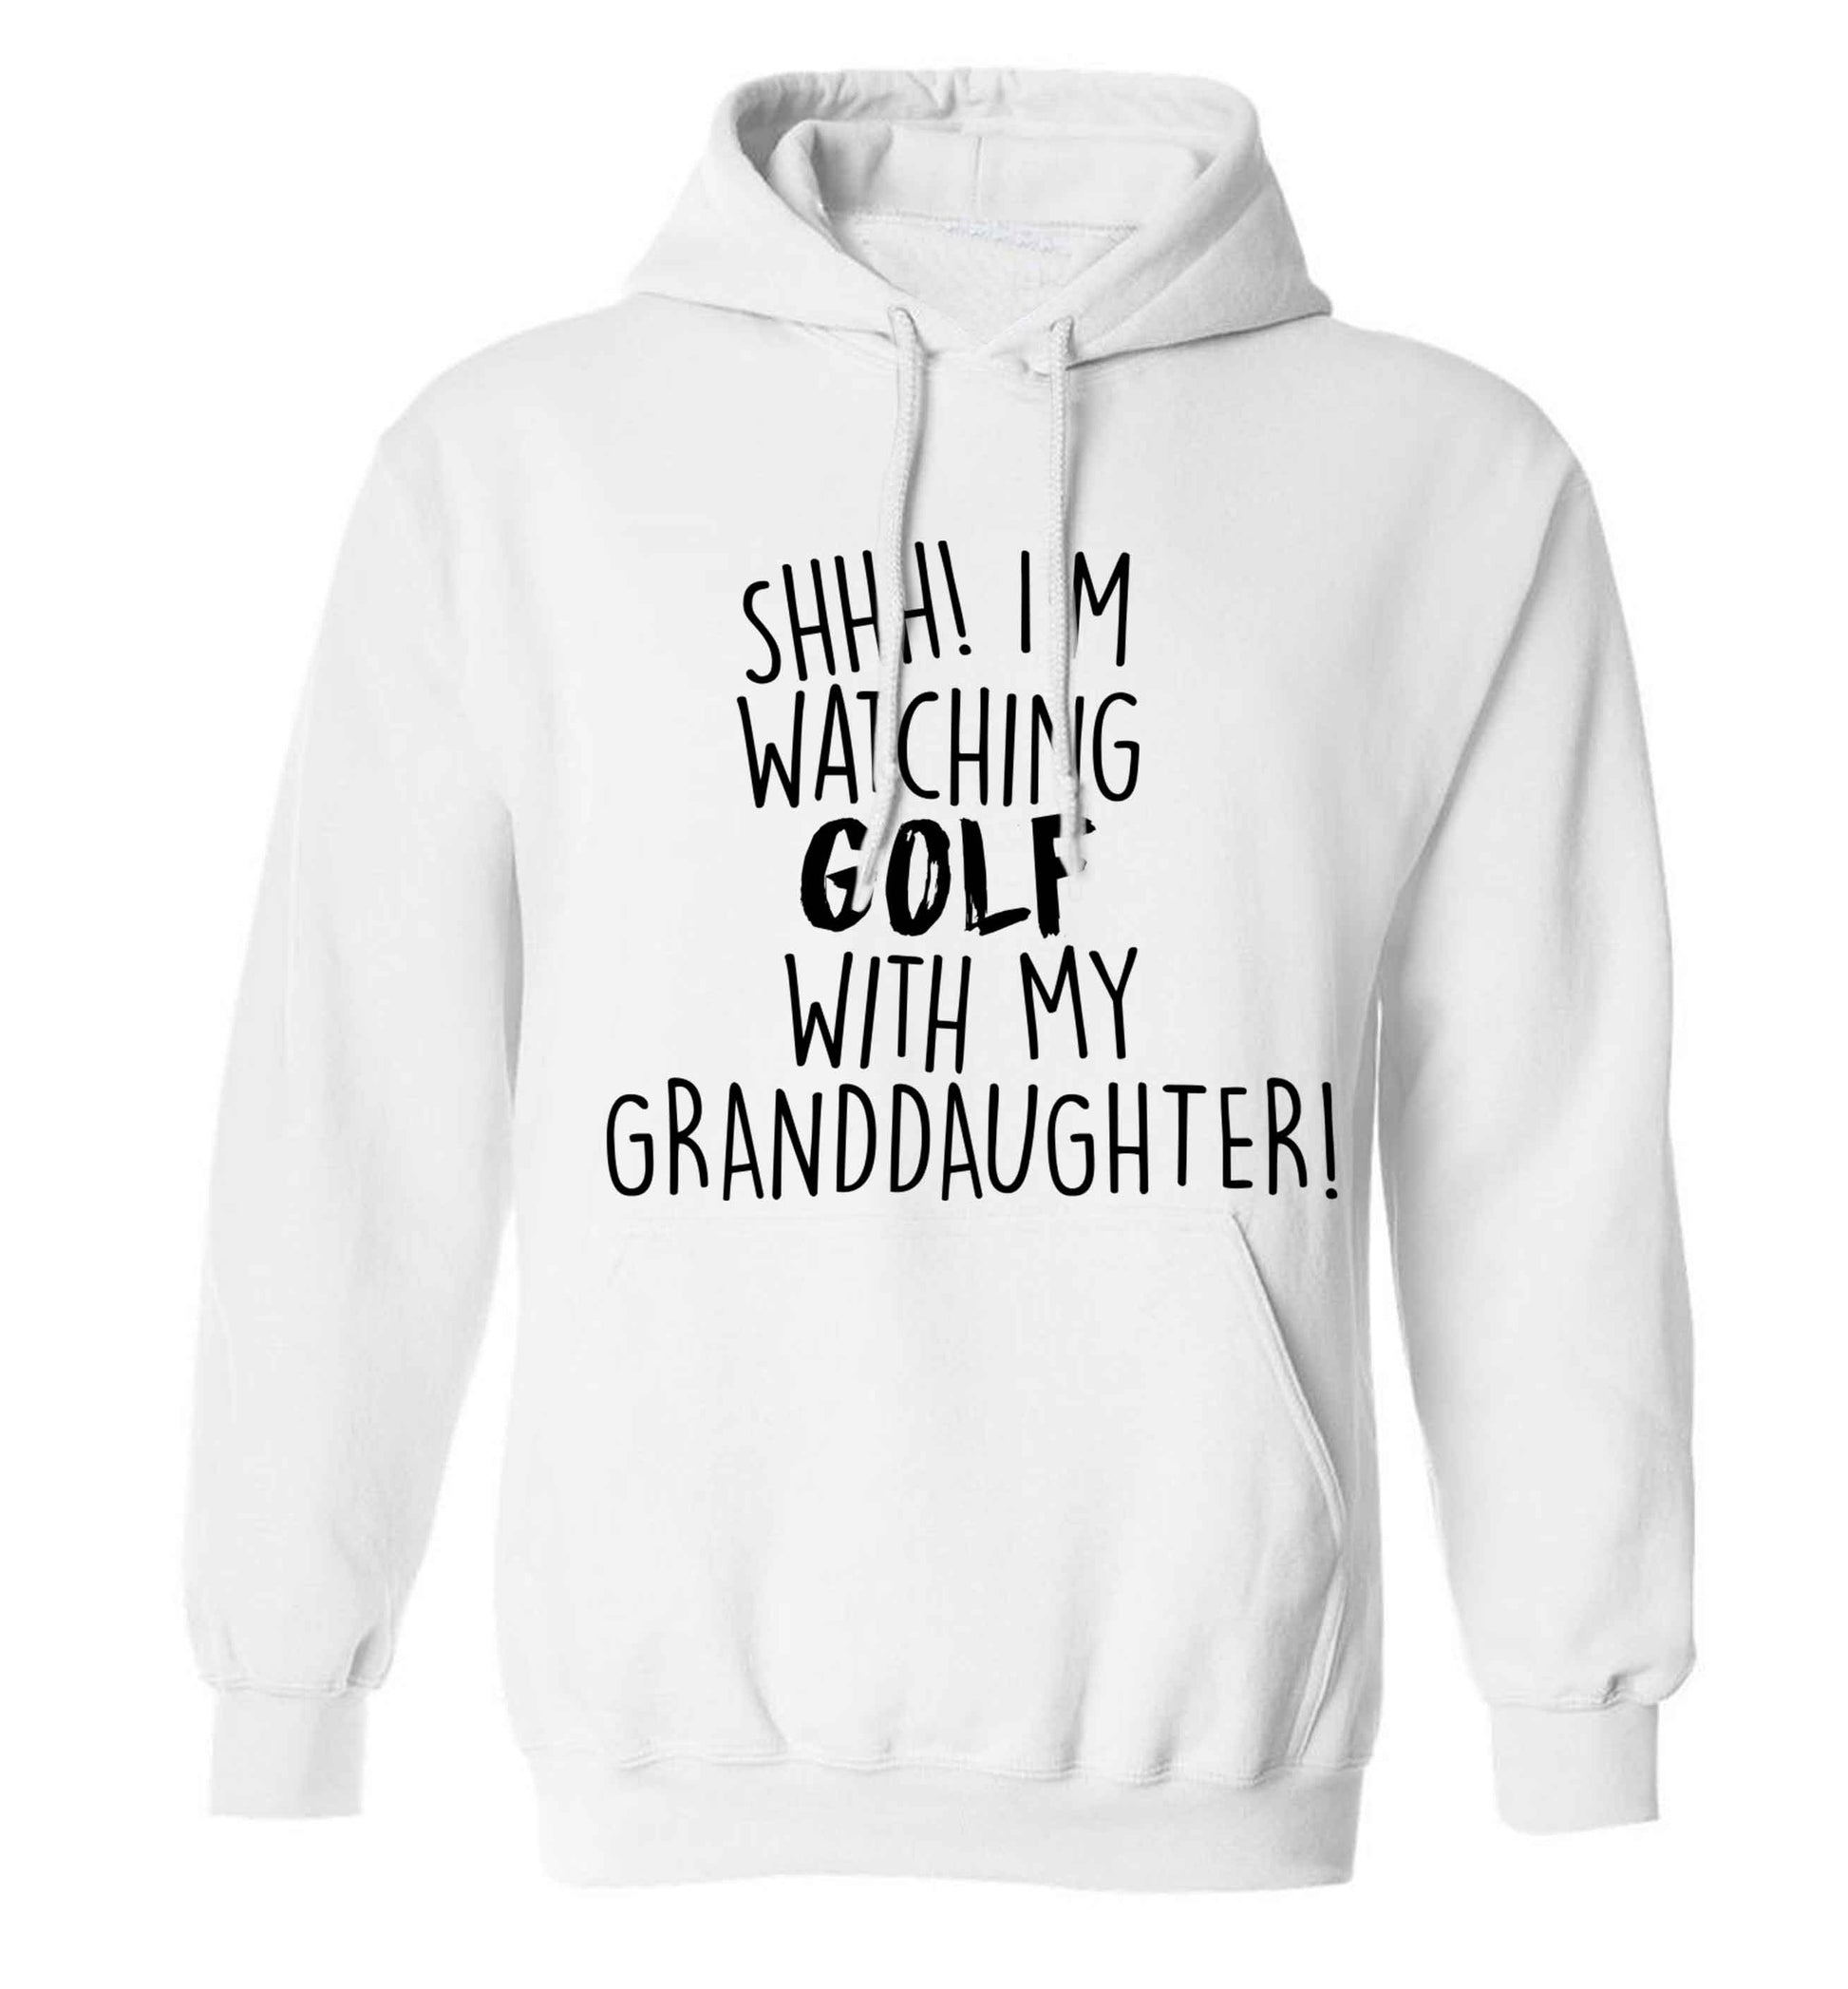 Shh I'm watching golf with my granddaughter adults unisex white hoodie 2XL